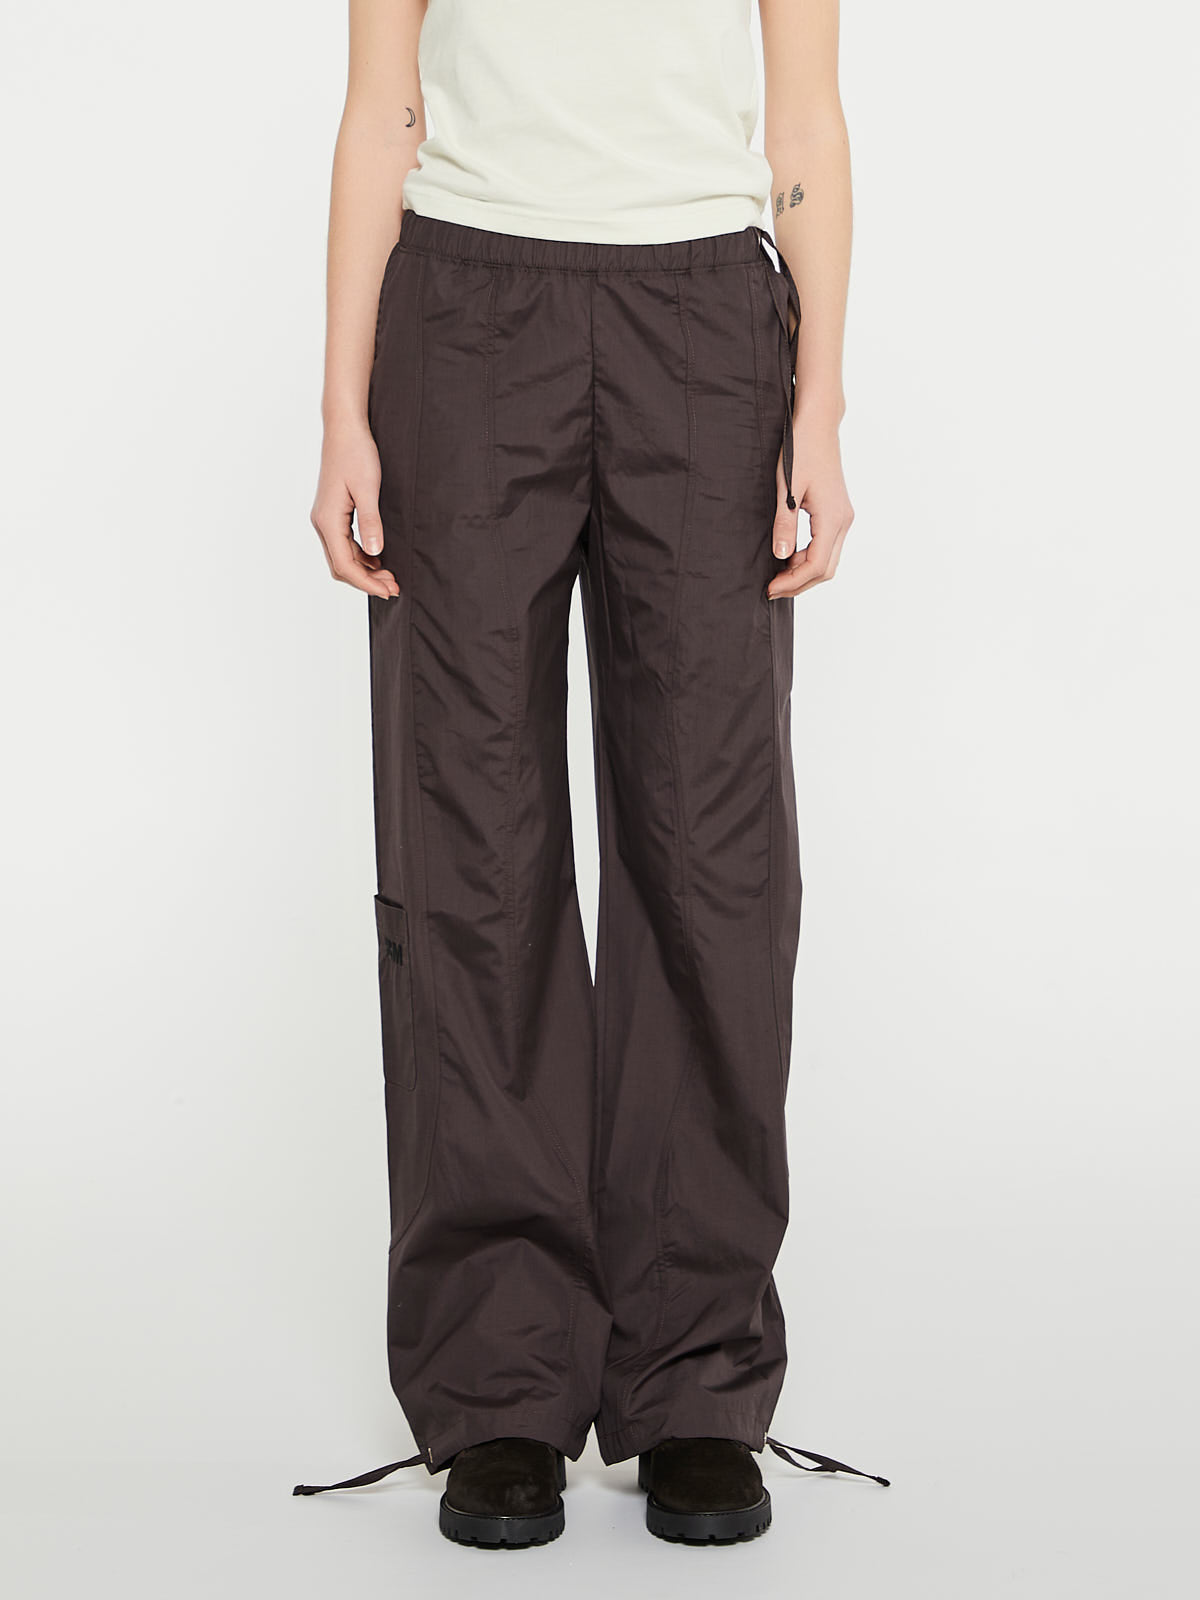 Pants for Women  Shop women's pants at stoy